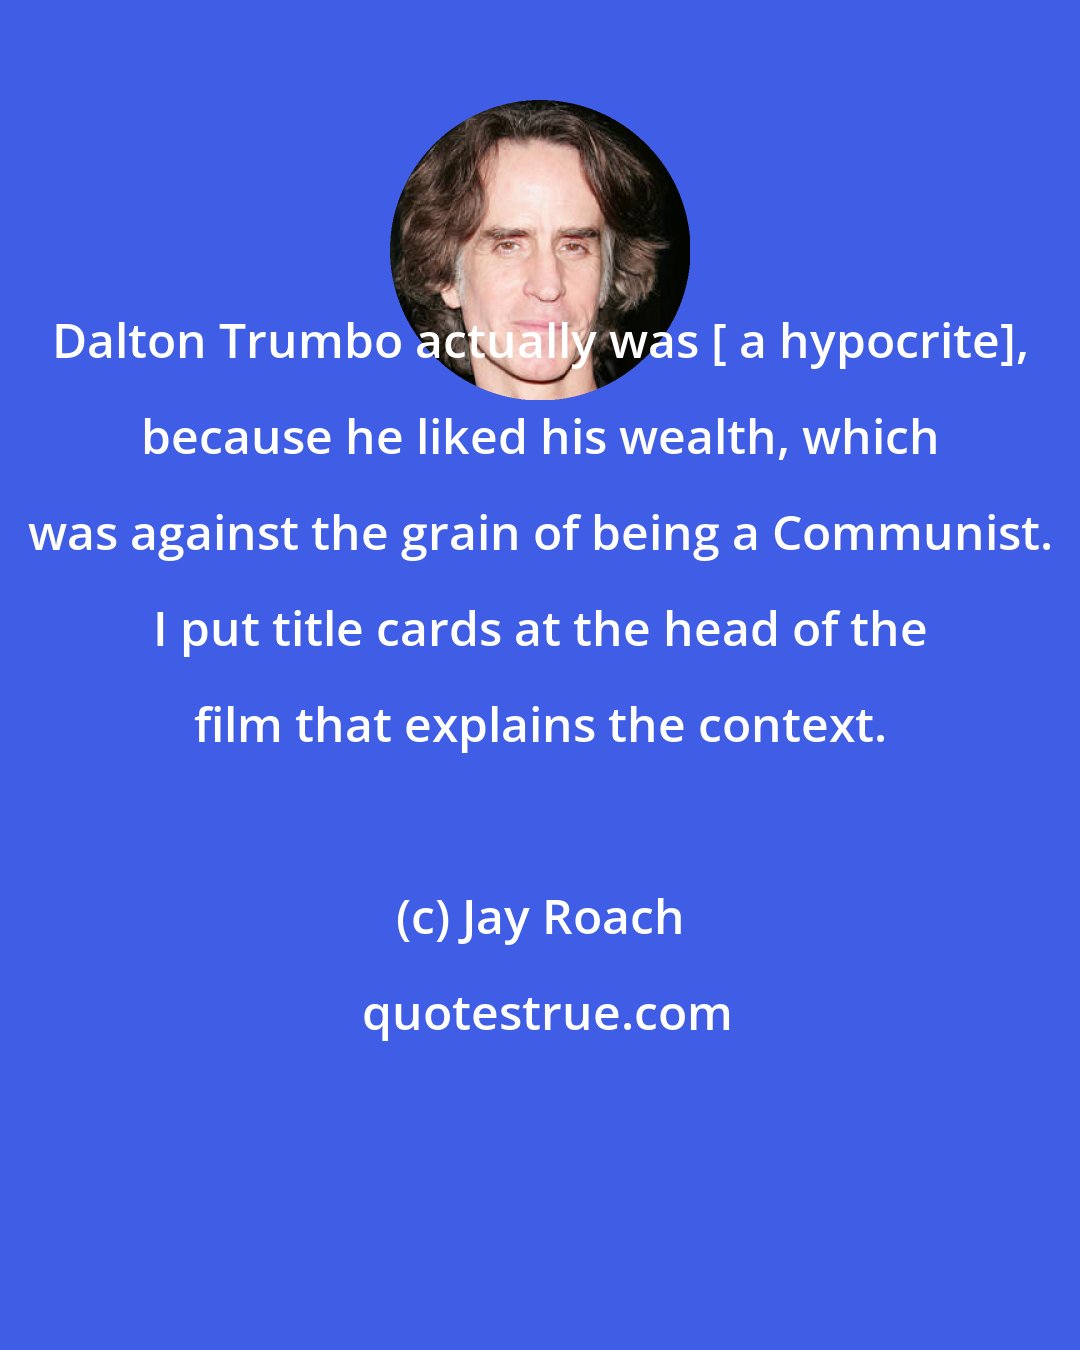 Jay Roach: Dalton Trumbo actually was [ a hypocrite], because he liked his wealth, which was against the grain of being a Communist. I put title cards at the head of the film that explains the context.